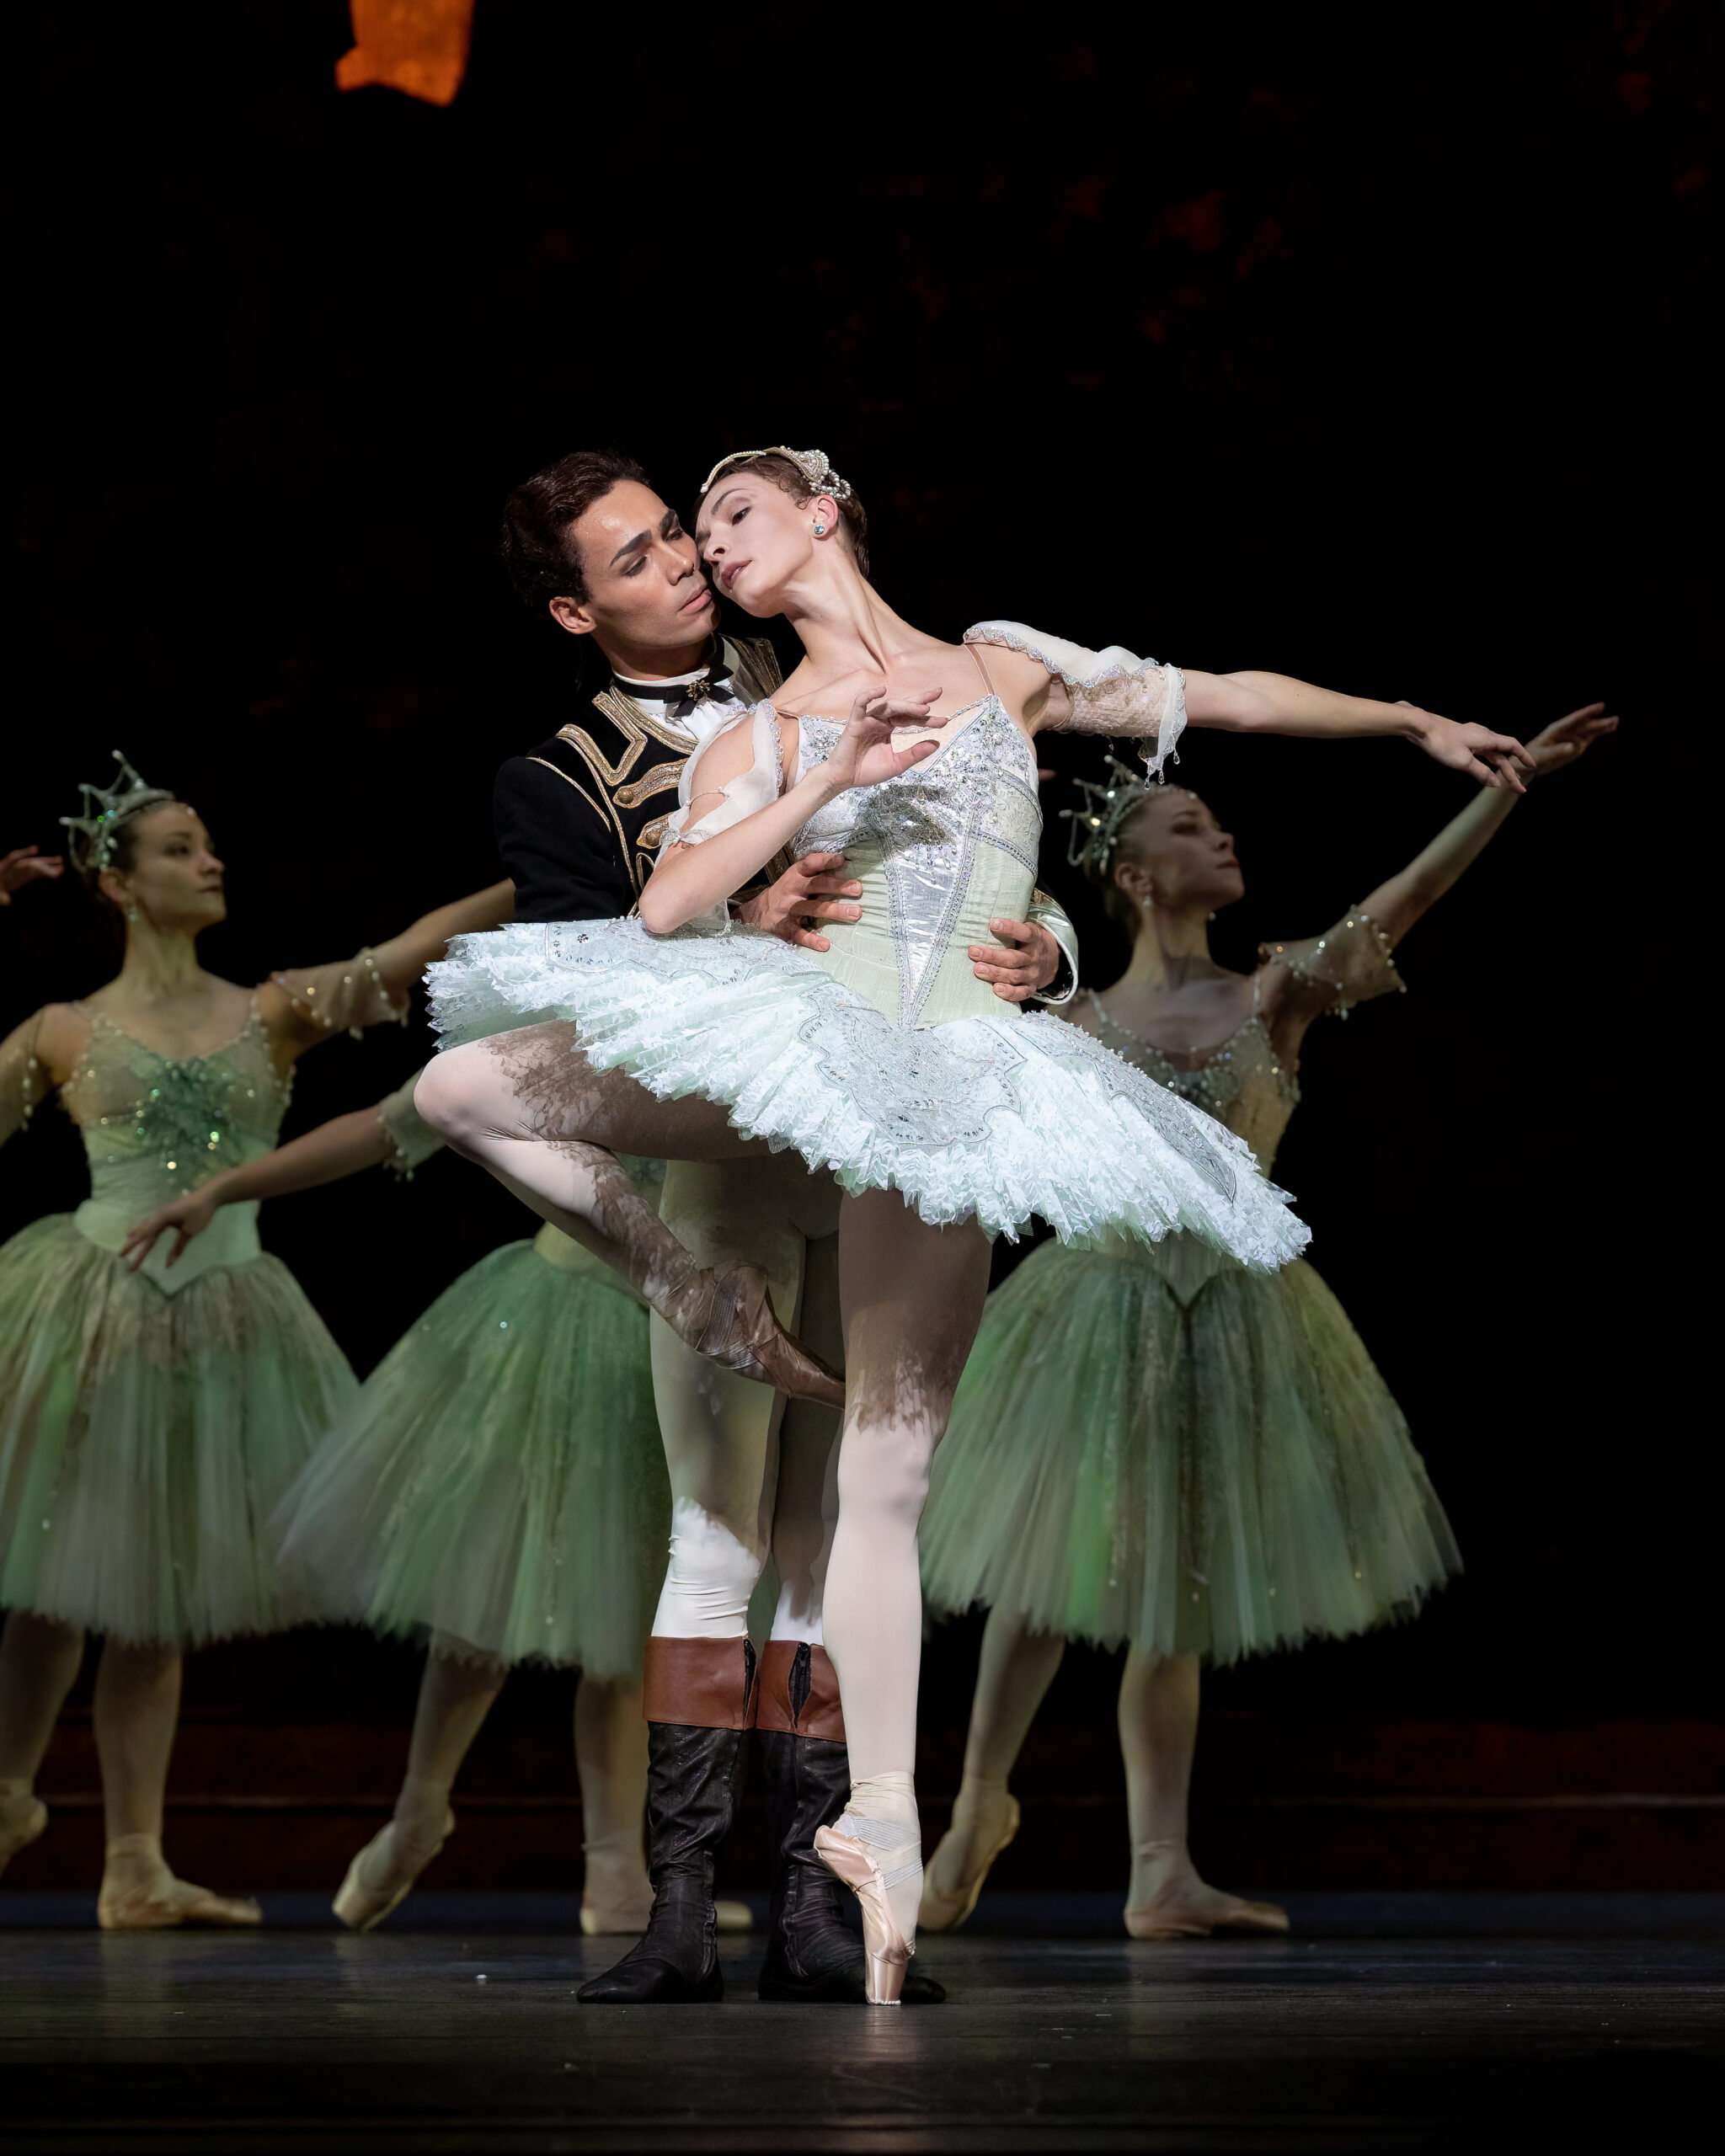 Victor Caiexta and Olga Smirnova dance a pas de deux during a performance of The Sleeping Beauty. Smirnova wears a white tutu and poses on pointe in retiré as Caixeta, wearing a black jacket, white tights and black and bron boots, stands behind her holding her waist. She looks back at him so that their faces are almost touching. Behind them, a trio of corps de ballet dancers in knee-length white tutus embellished with rhinestones and tall crowns pose in tendu derriere effacé.